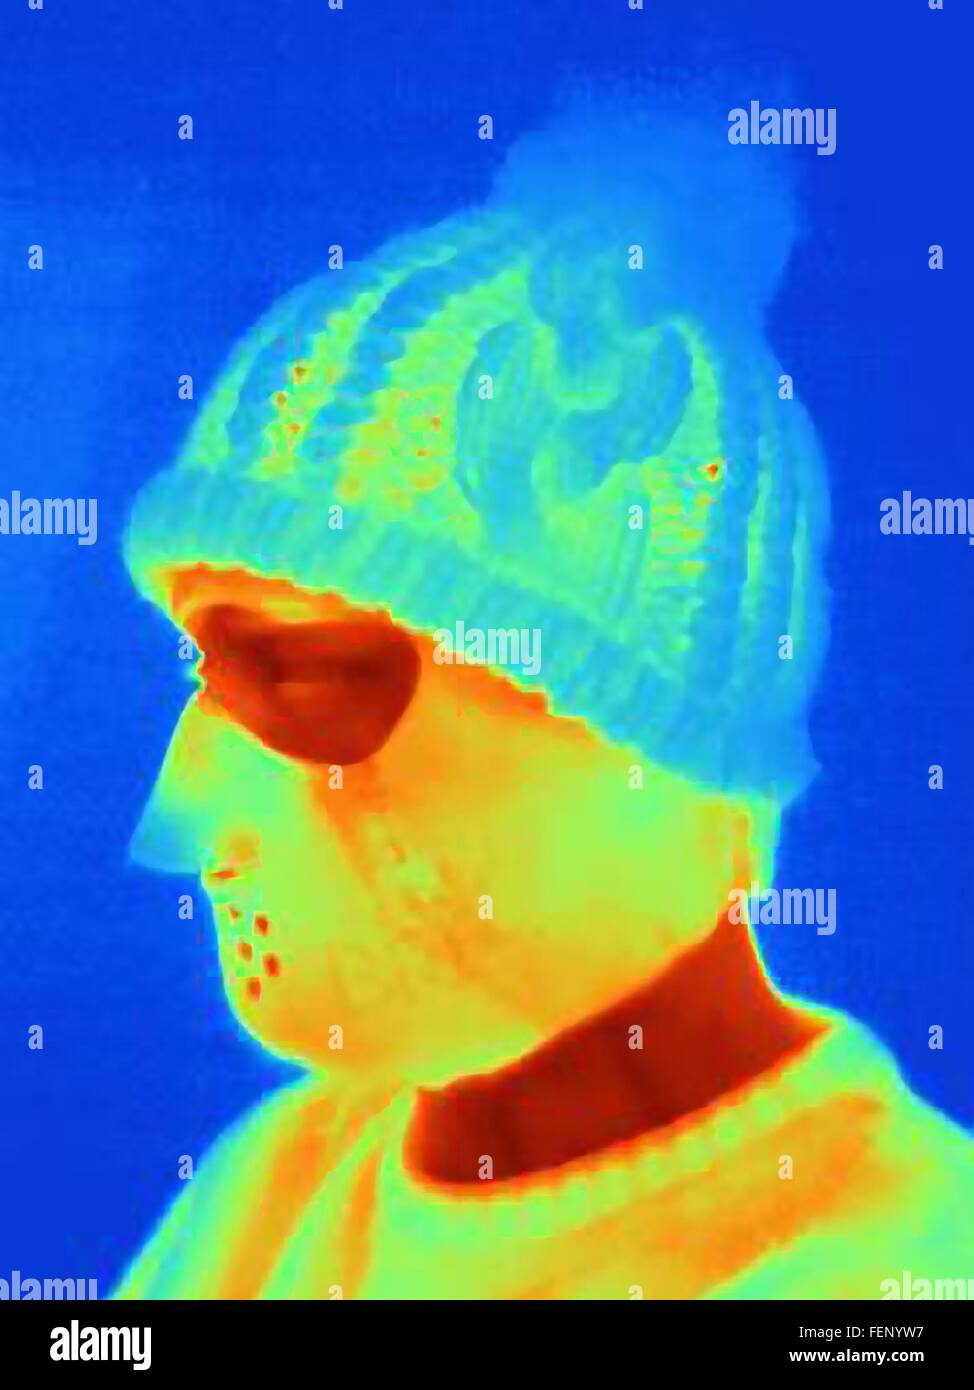 Thermal image of young man wearing threatening mask and knit hat Stock Photo